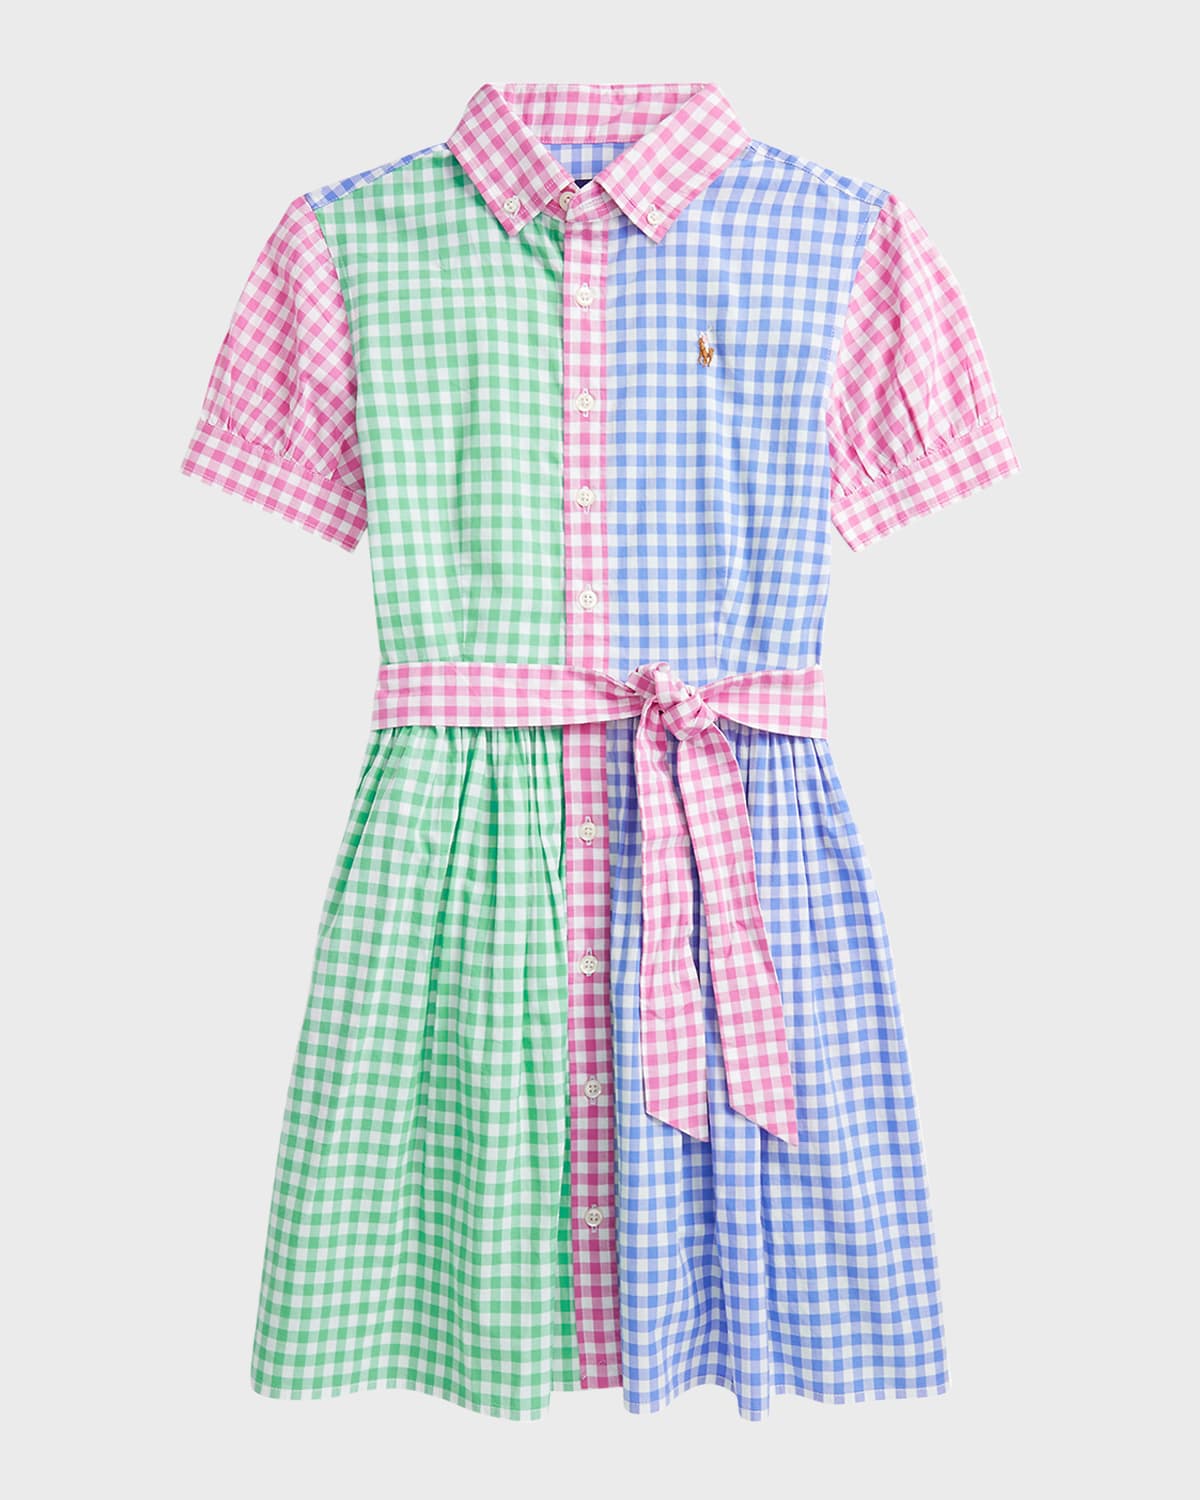 Ralph Lauren Kids' Girl's Gingham Colorblocked Embroidered Dress In Pink